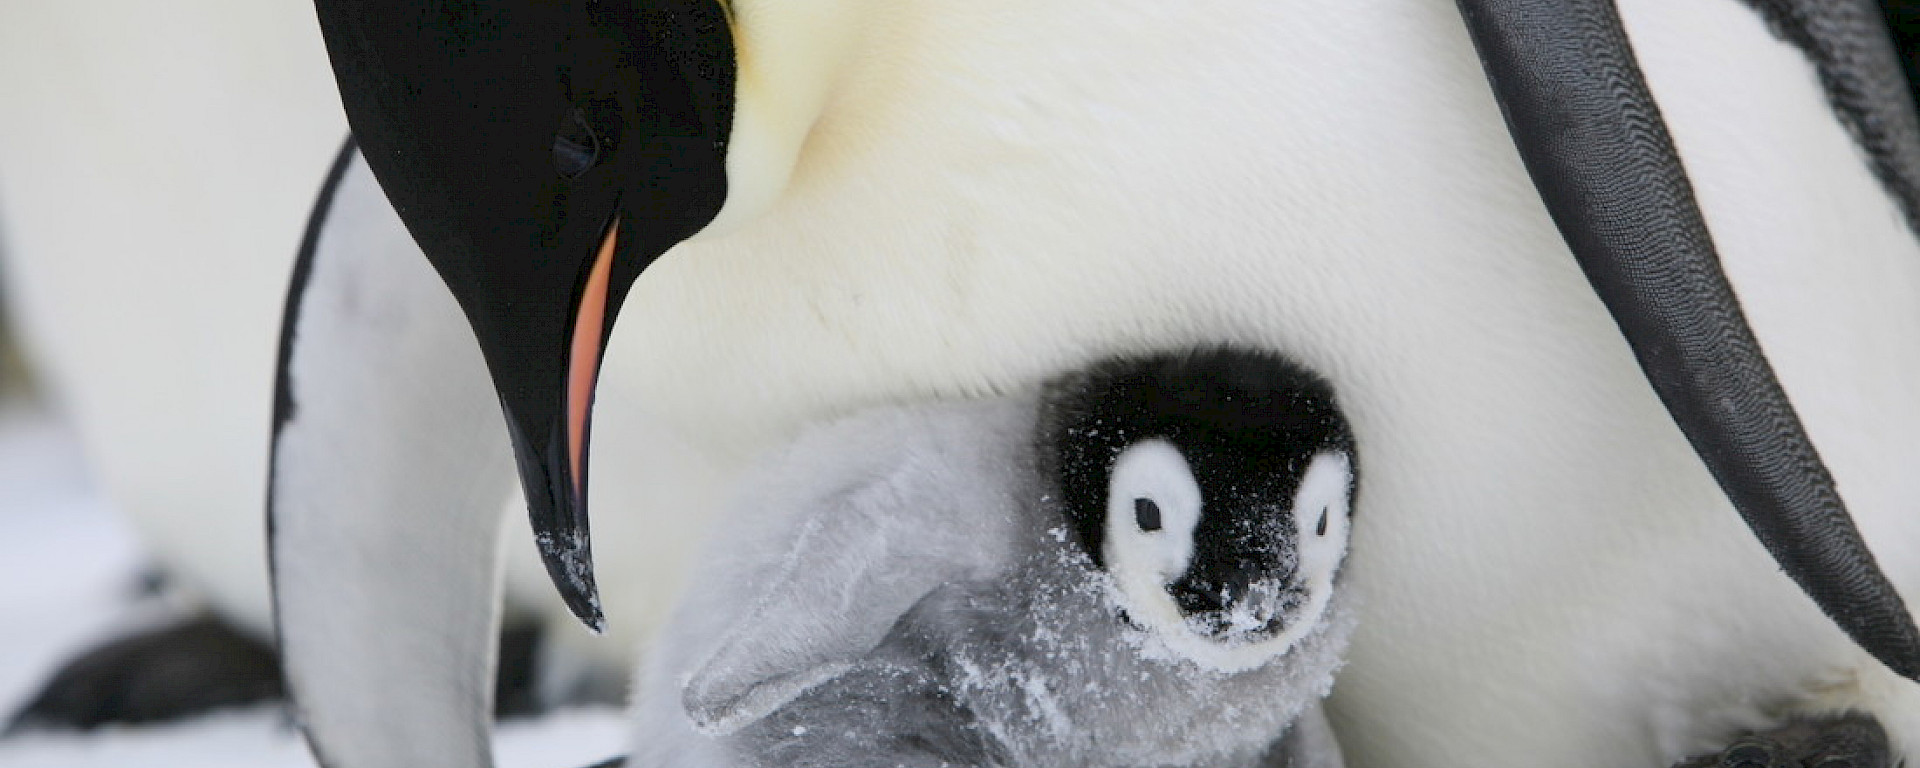 Emperor penguin chick peeking out from under its parent’s brood flap.